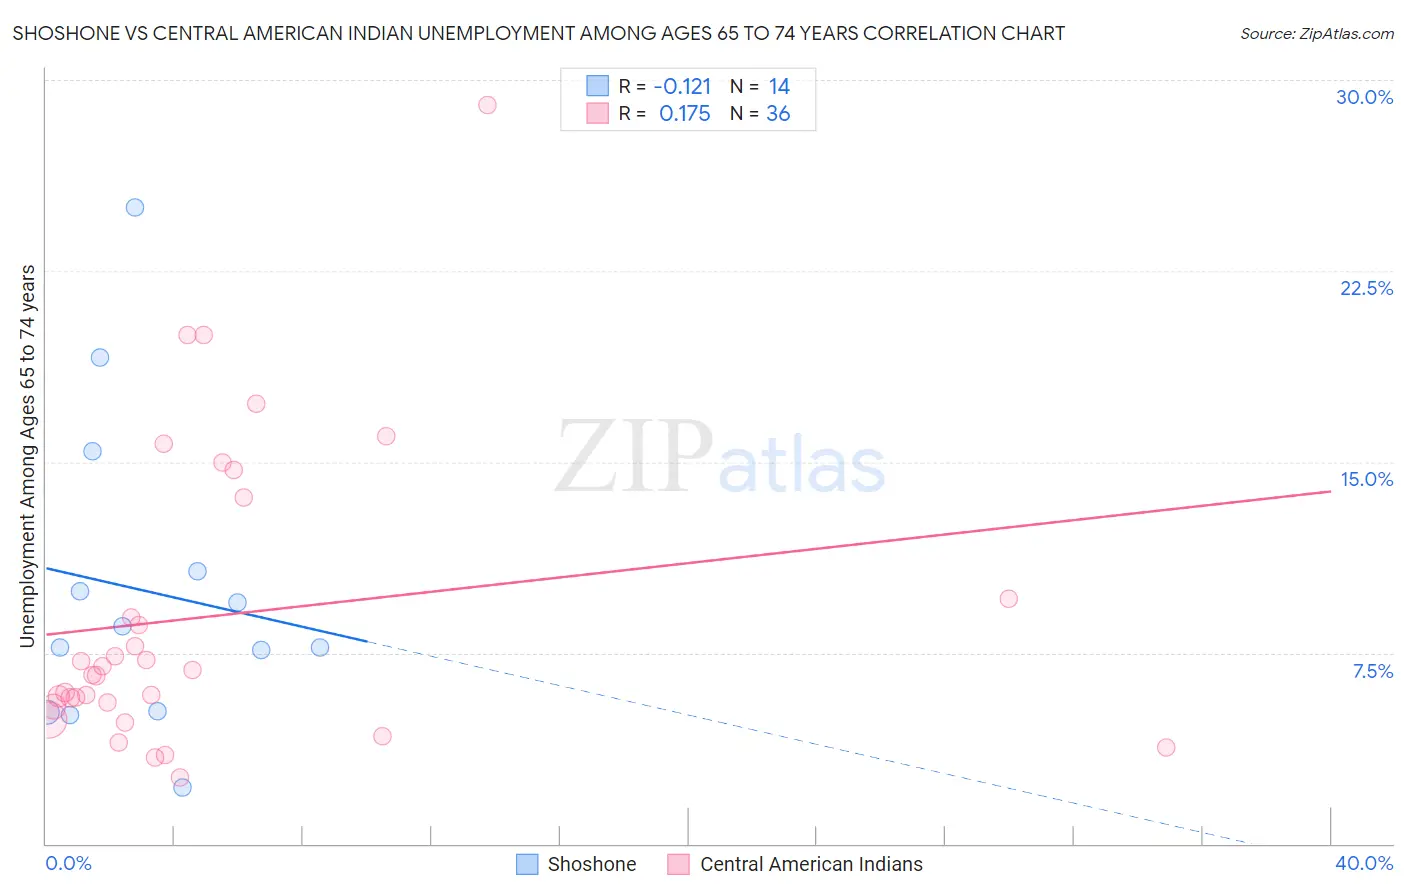 Shoshone vs Central American Indian Unemployment Among Ages 65 to 74 years